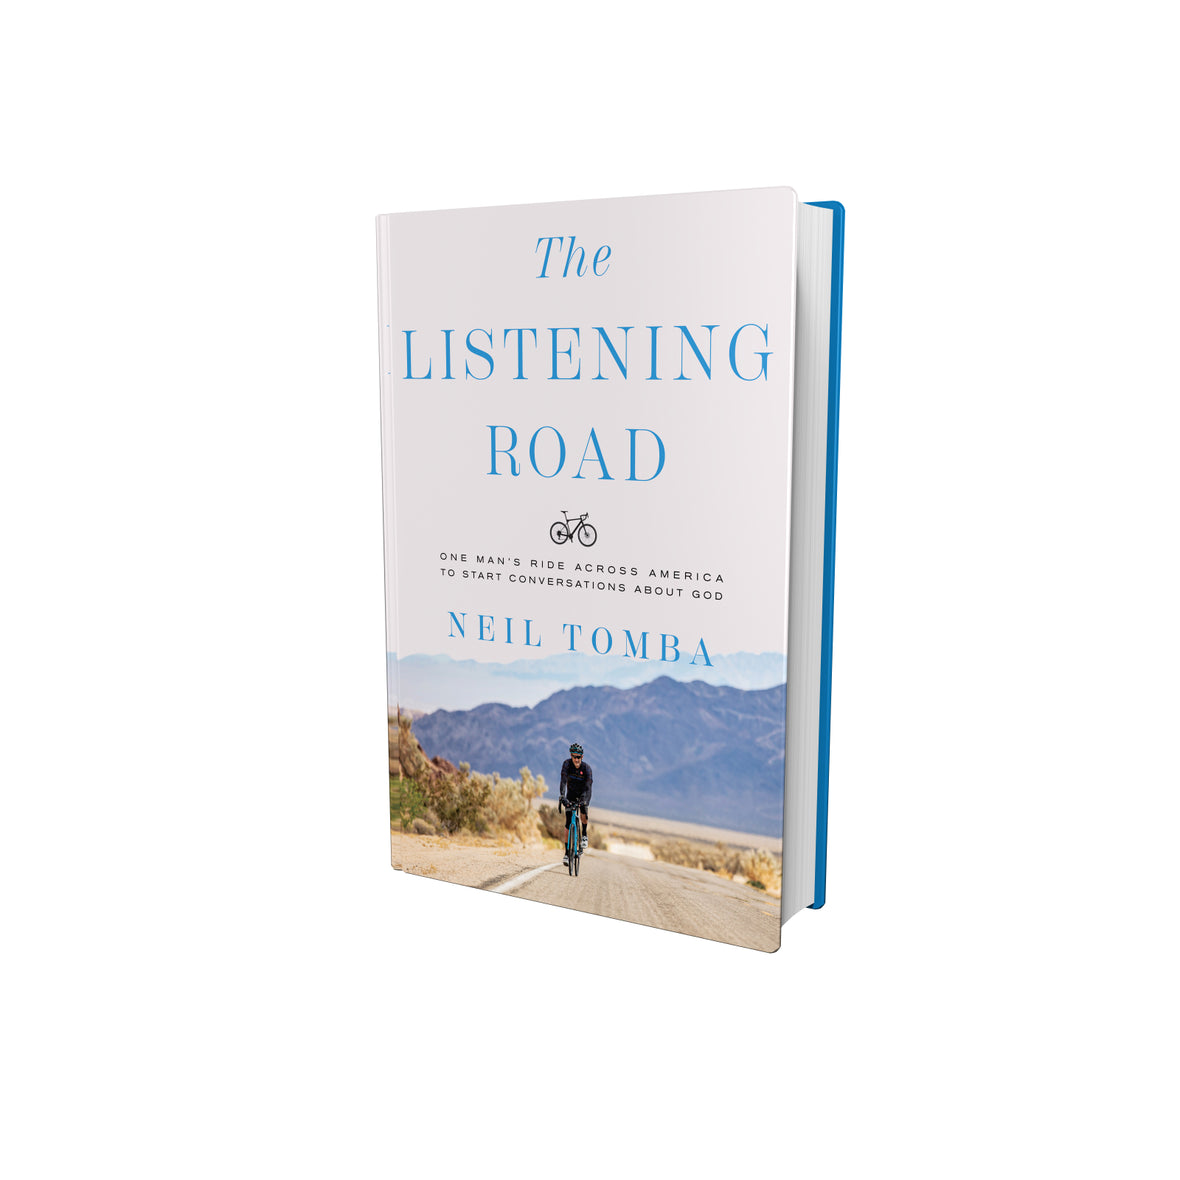 The Listening Road: One Man's Ride Across America to Start Conversations About God